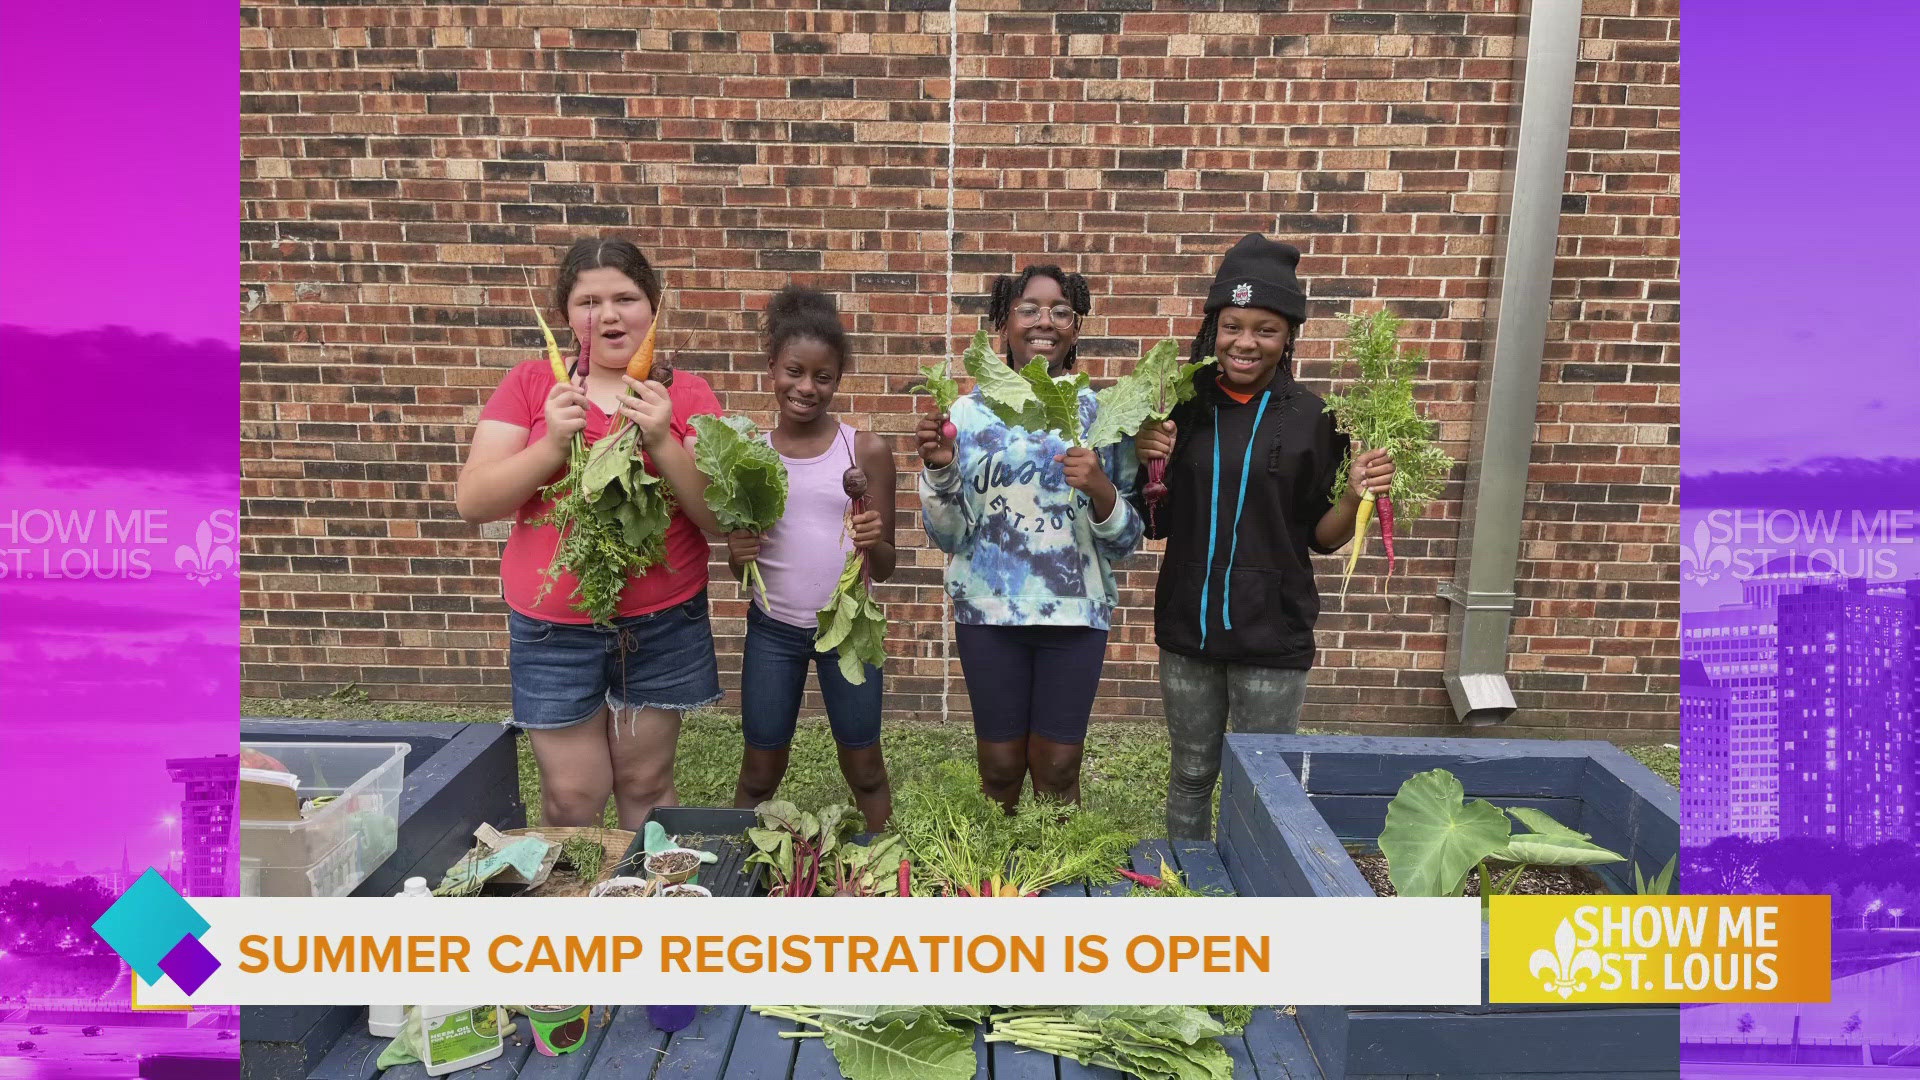 BGCSTL provides a safe place for kids of all ages to learn and grow - Summer Camp Registration is OPEN